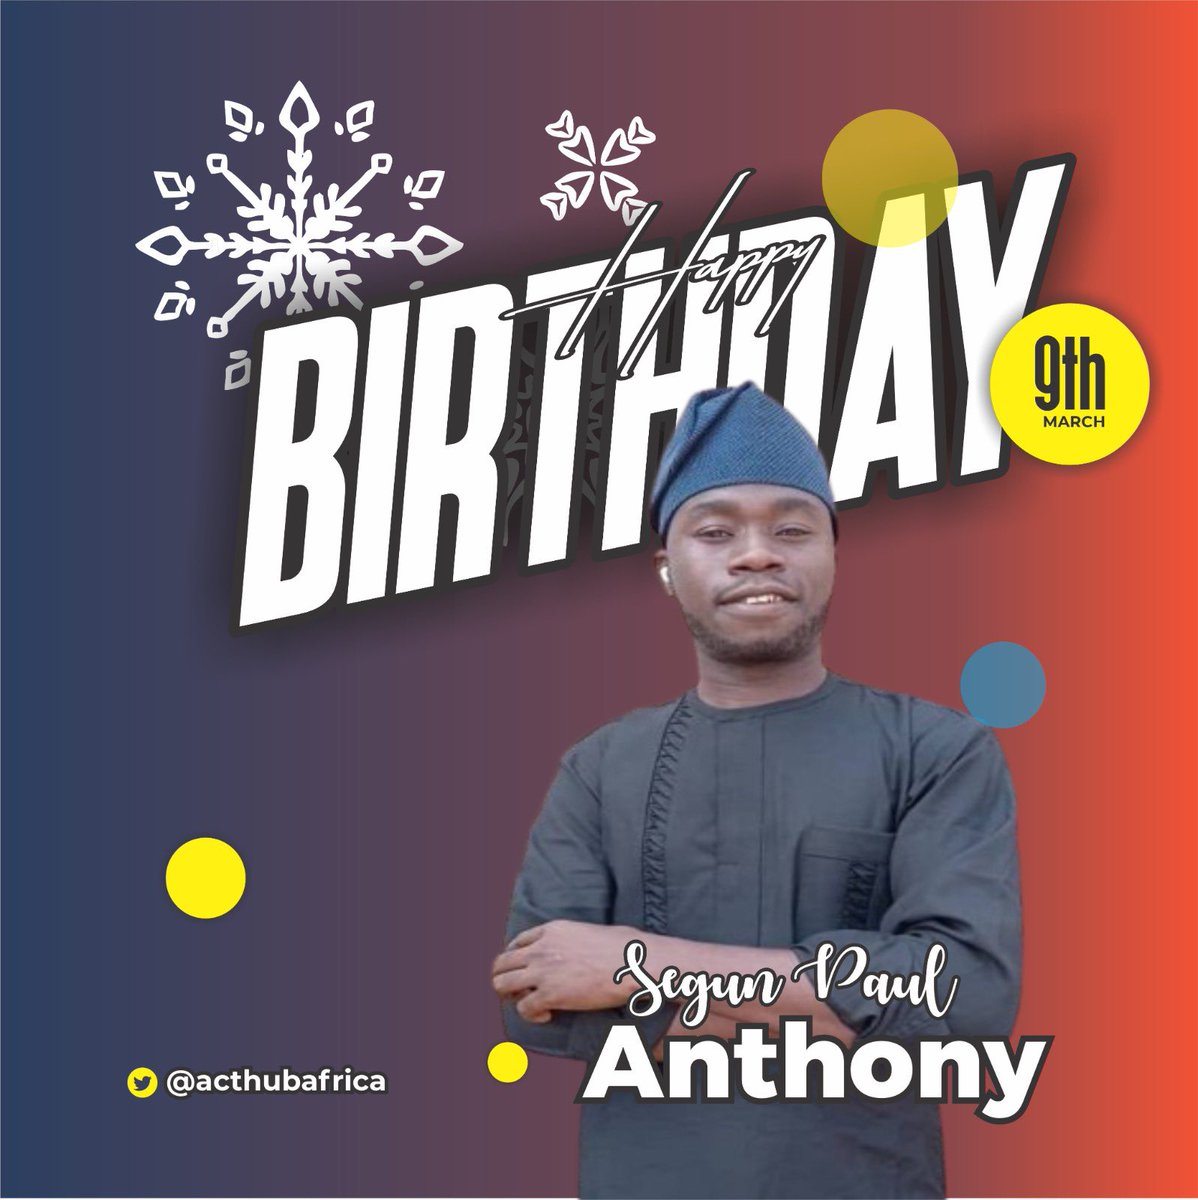 You are a definition of devotion and selflessness, we celebrate you today and always. @twergywhite @criticalpathng #acthub